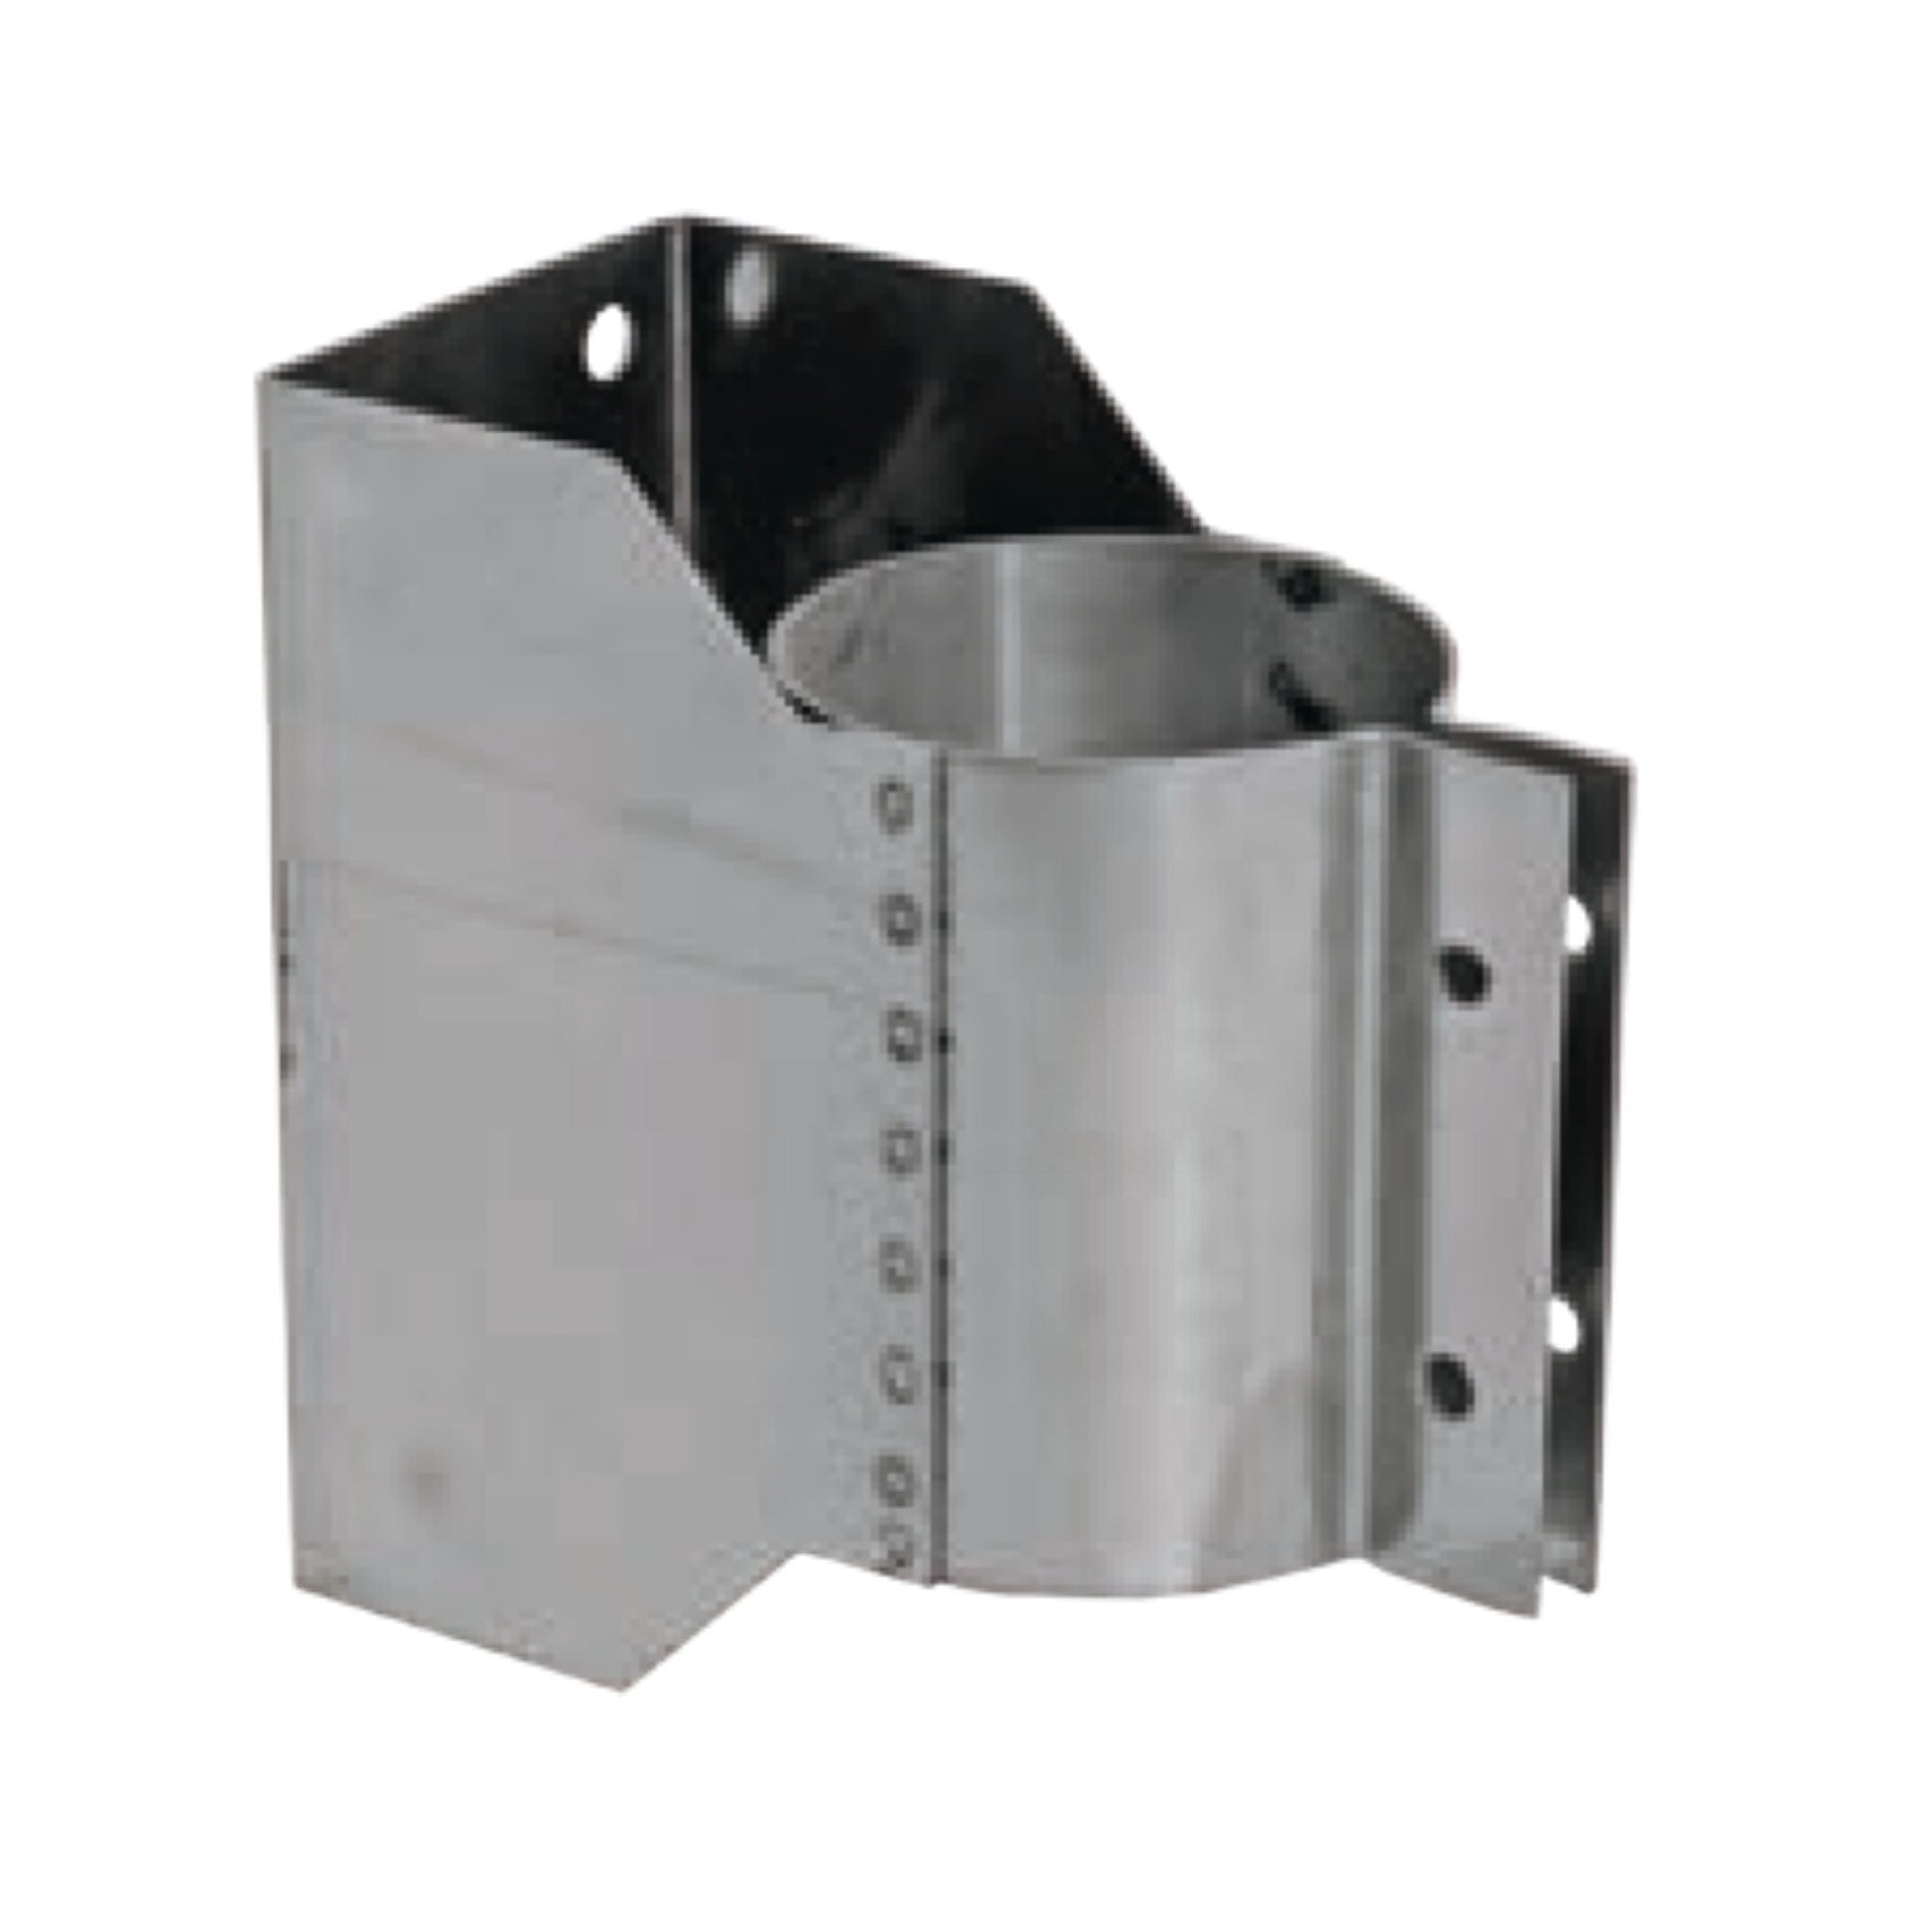 DuraVent FasNSeal 9" 29-4C Stainless Steel Wall Bracket